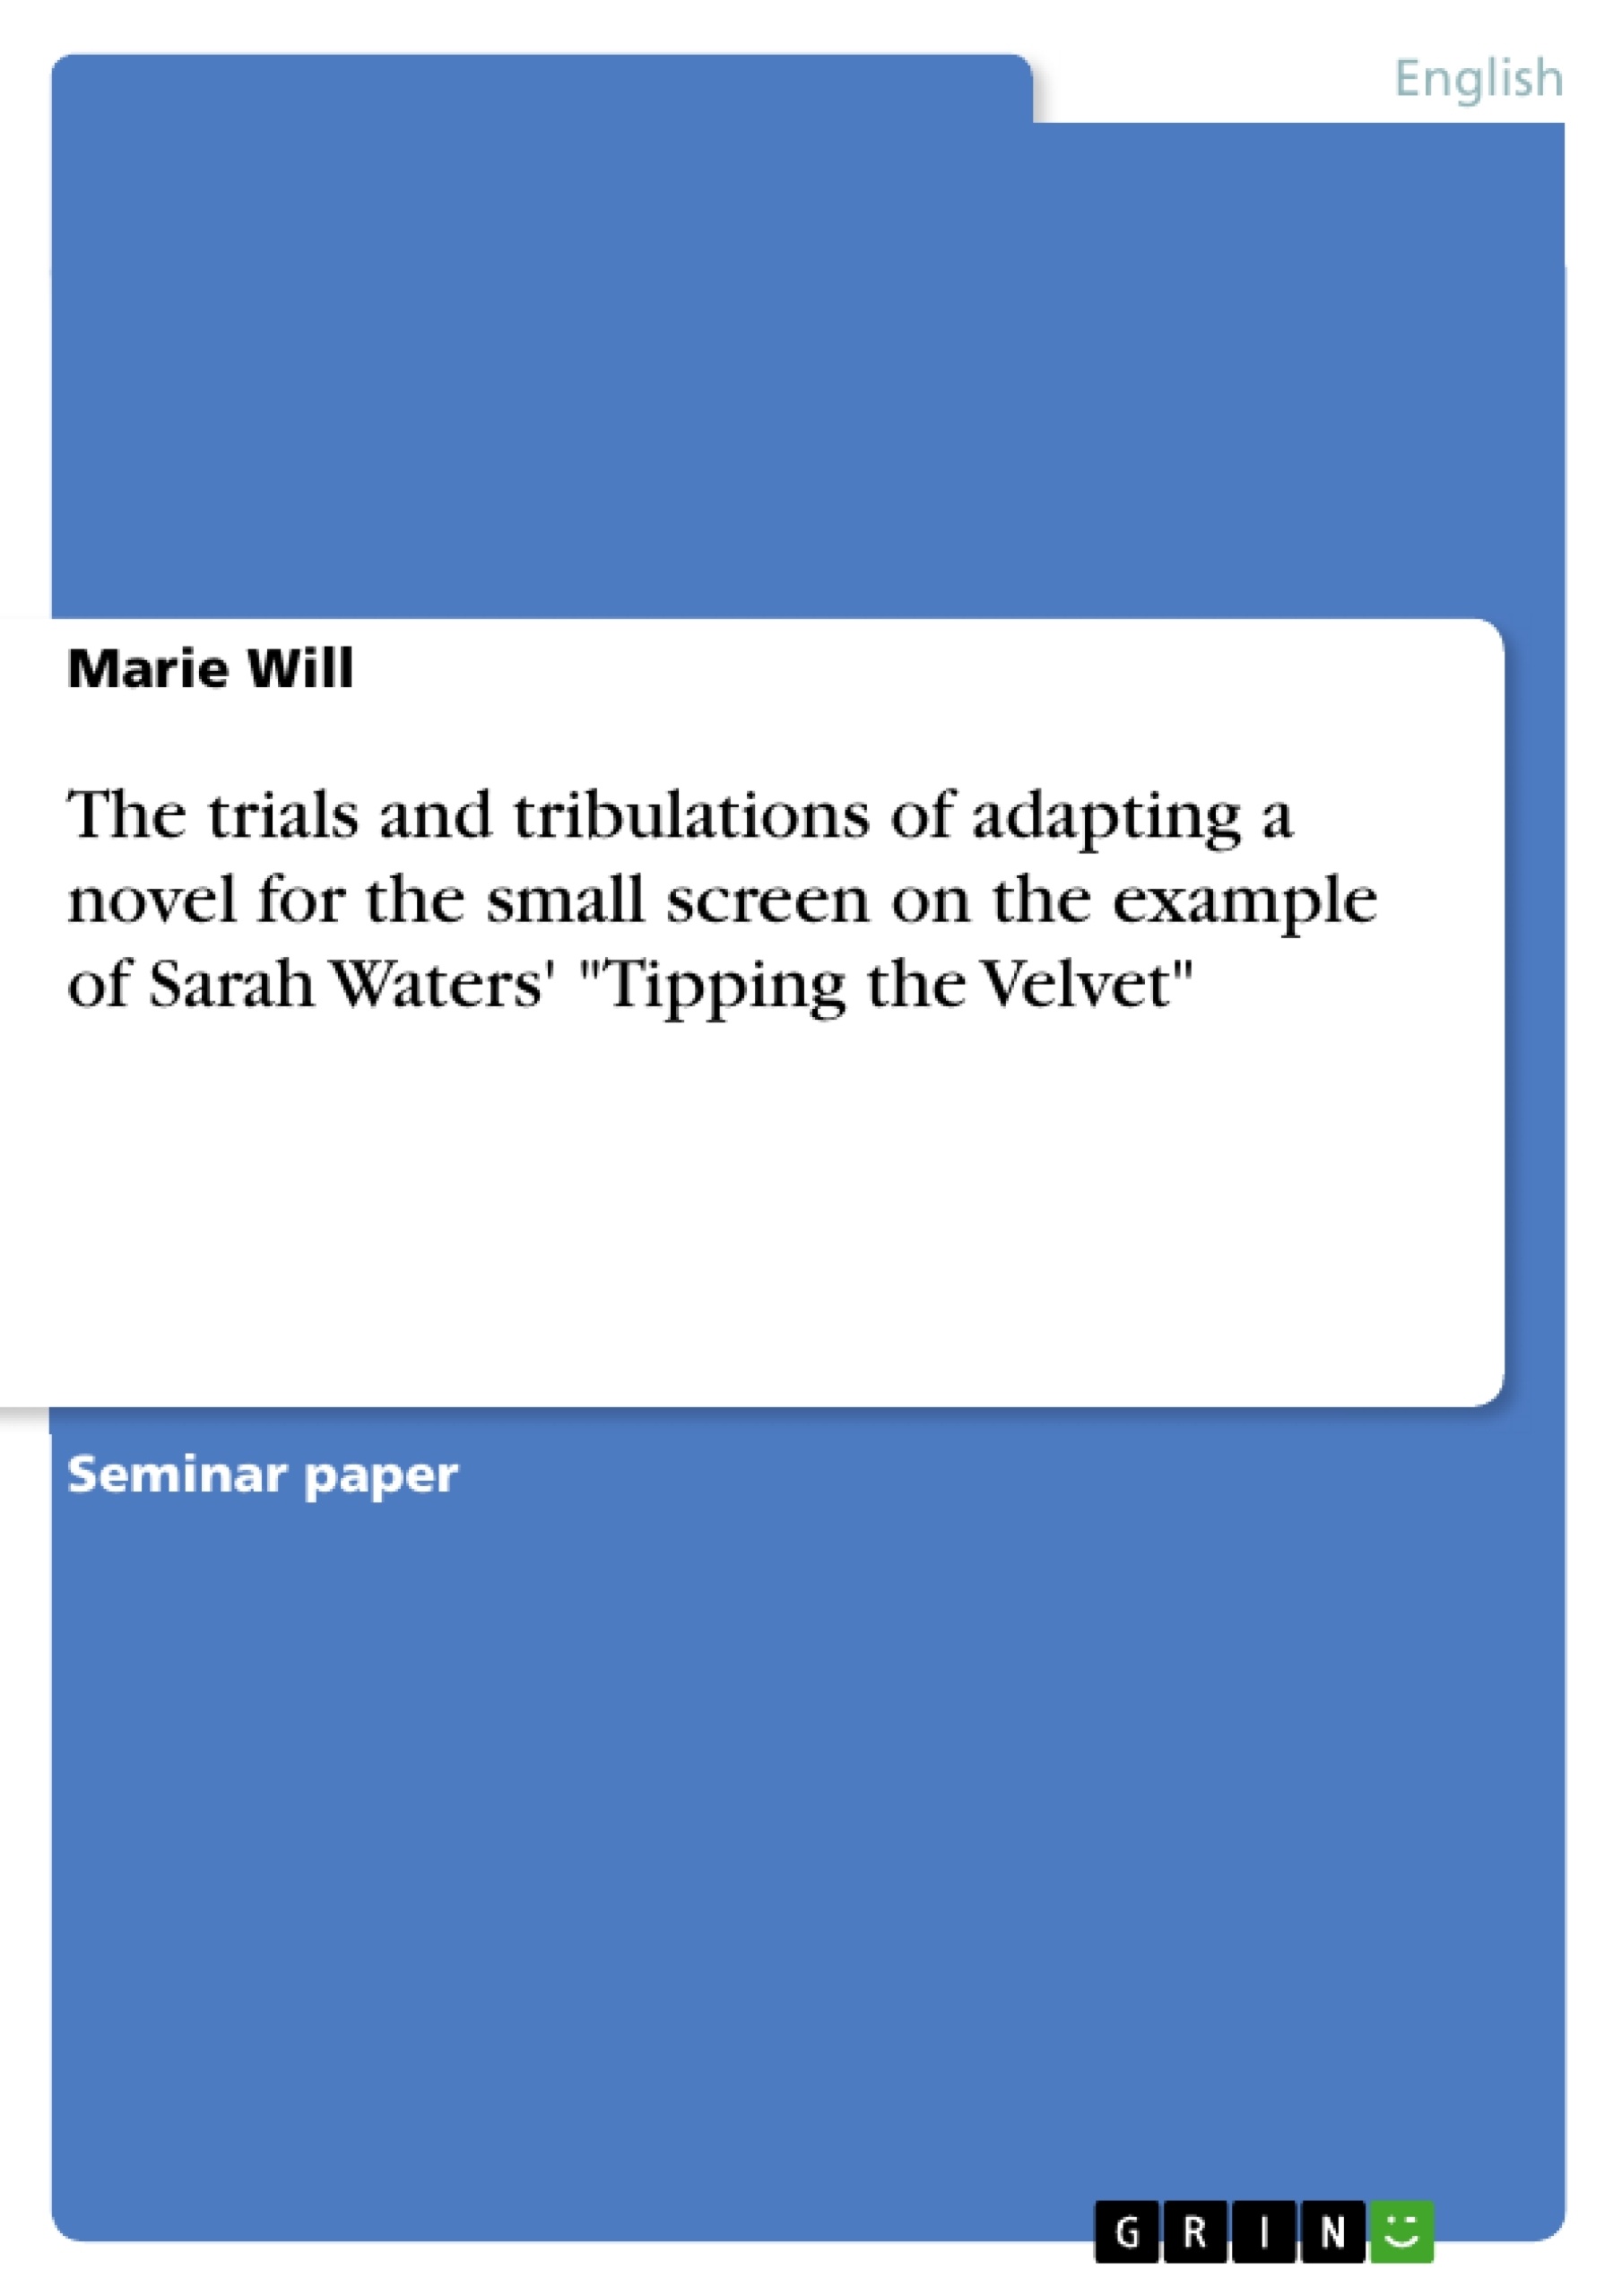 Title: The trials and tribulations of adapting a novel for the small screen on the example of Sarah Waters' "Tipping the Velvet"